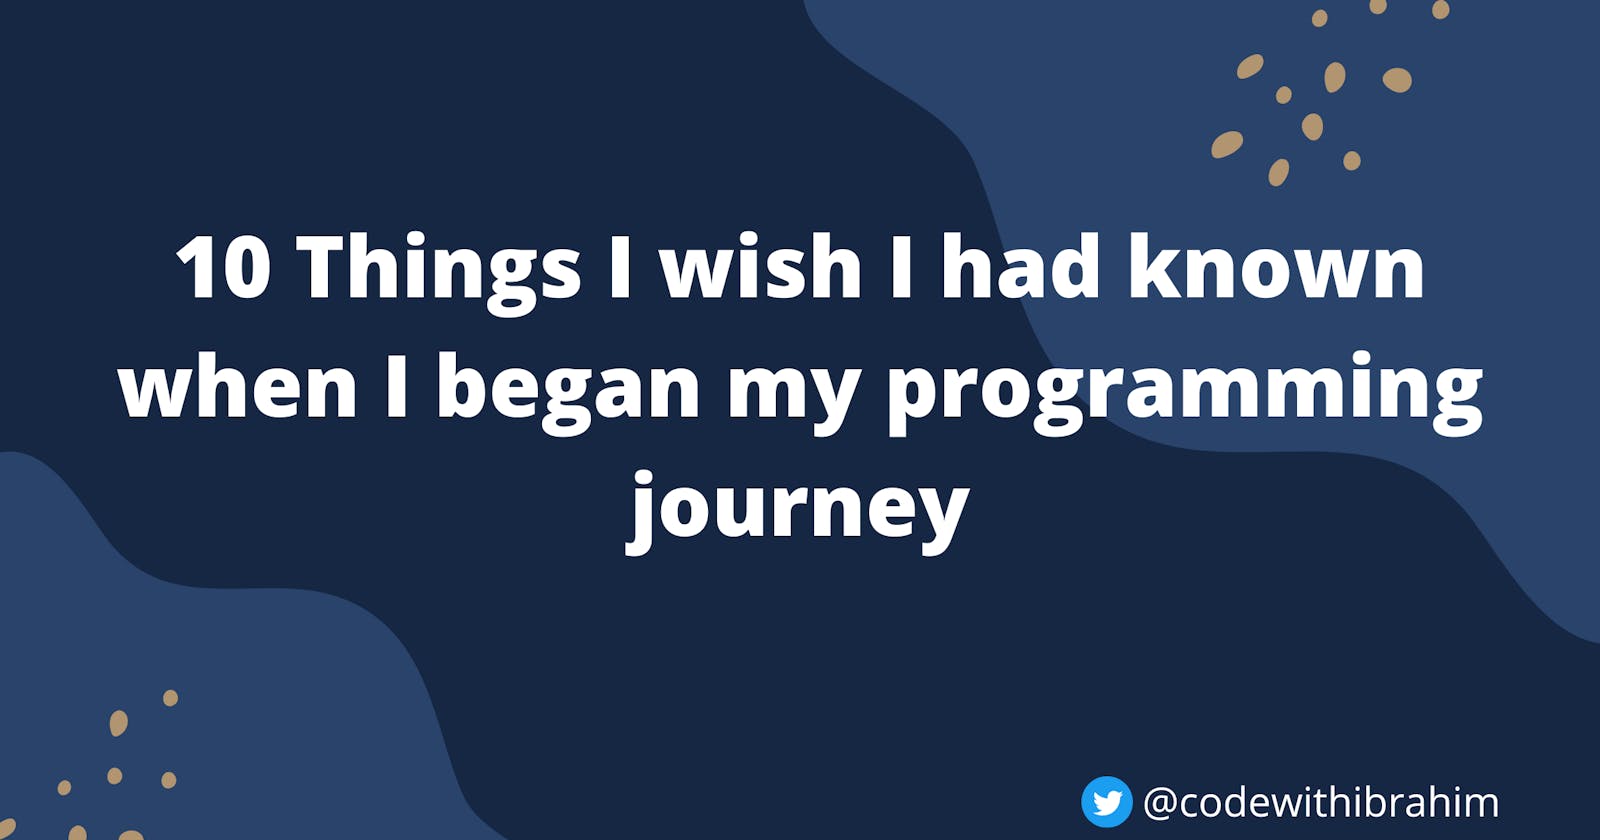 10 Things I wish I had known when I began my programming journey